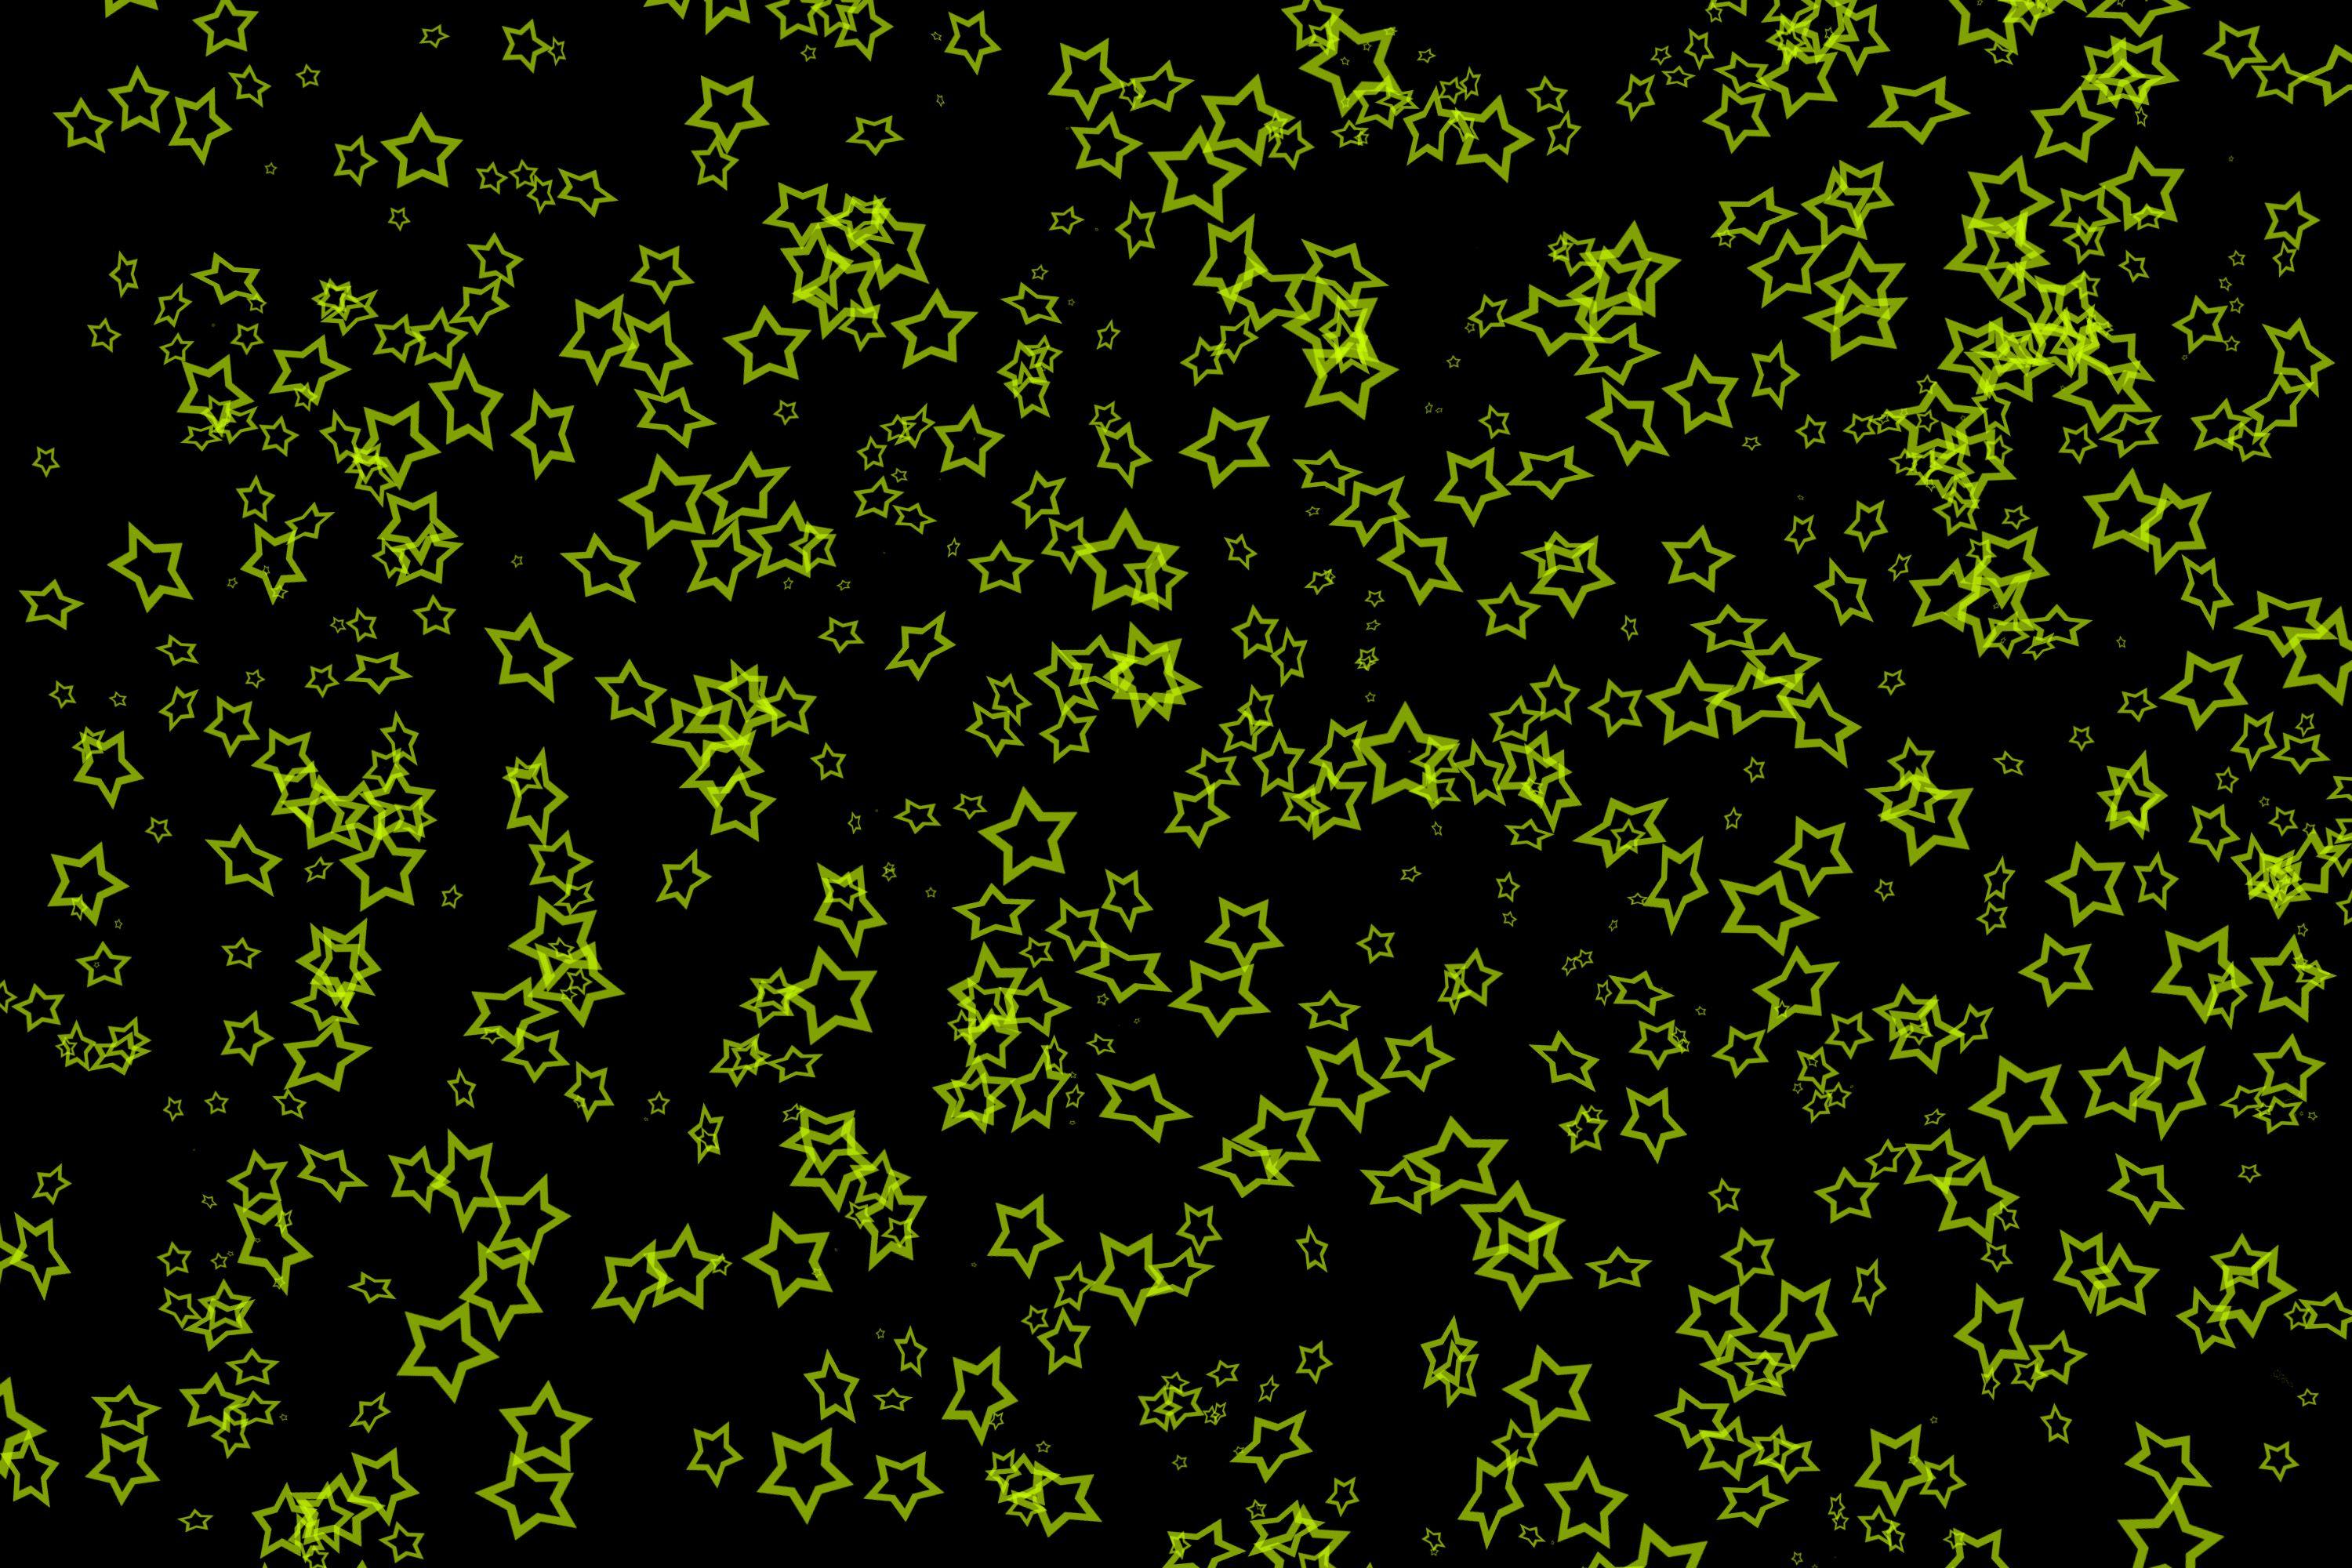 Black Yellow Star Logo - small yellow stars | Free backgrounds and textures | Cr103.com